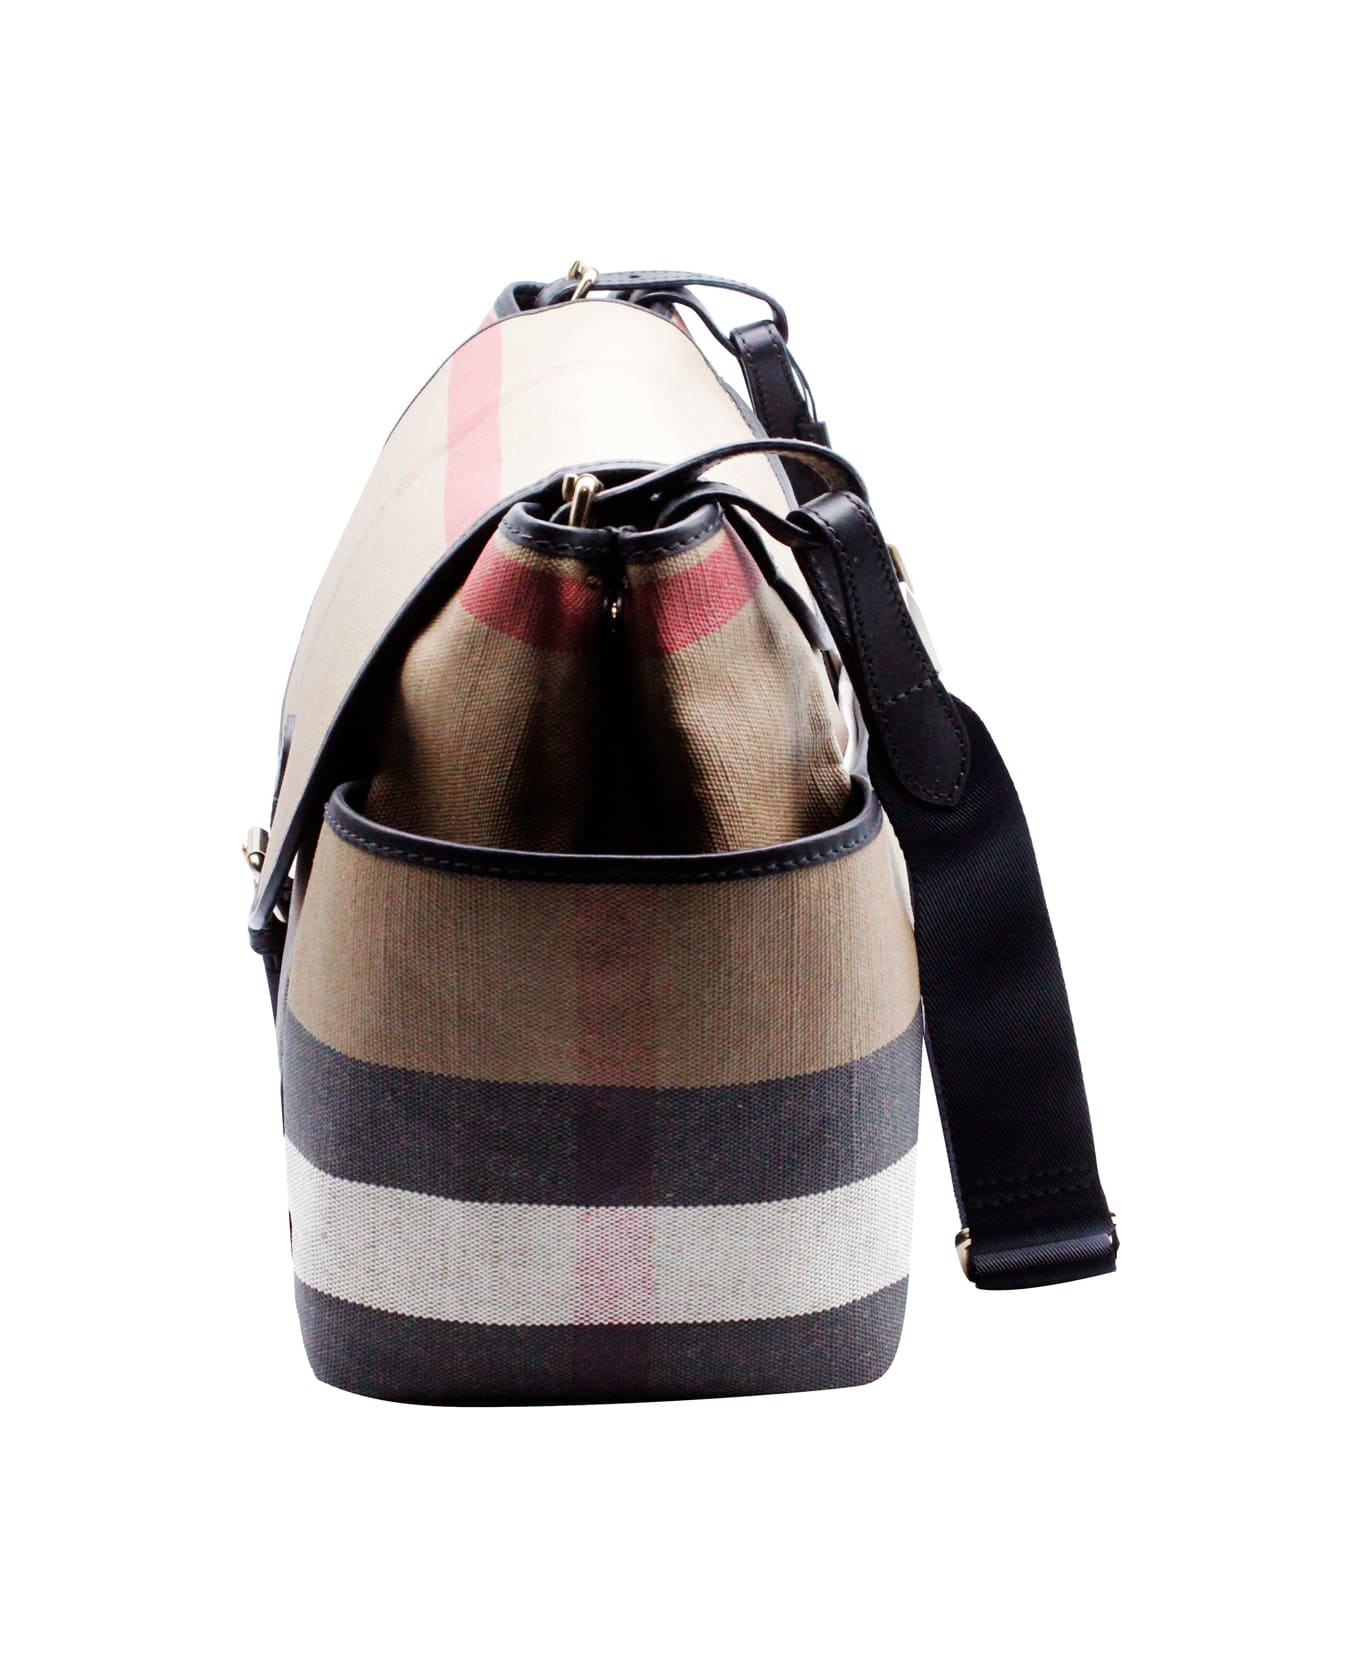 Burberry Mum Changing Bag Made Of Cotton Canvas With Check Pattern With Shoulder Strap, Comfortable Internal Pockets And Changing Mat. Measures Cm. 38x30x17 - Check アクセサリー＆ギフト